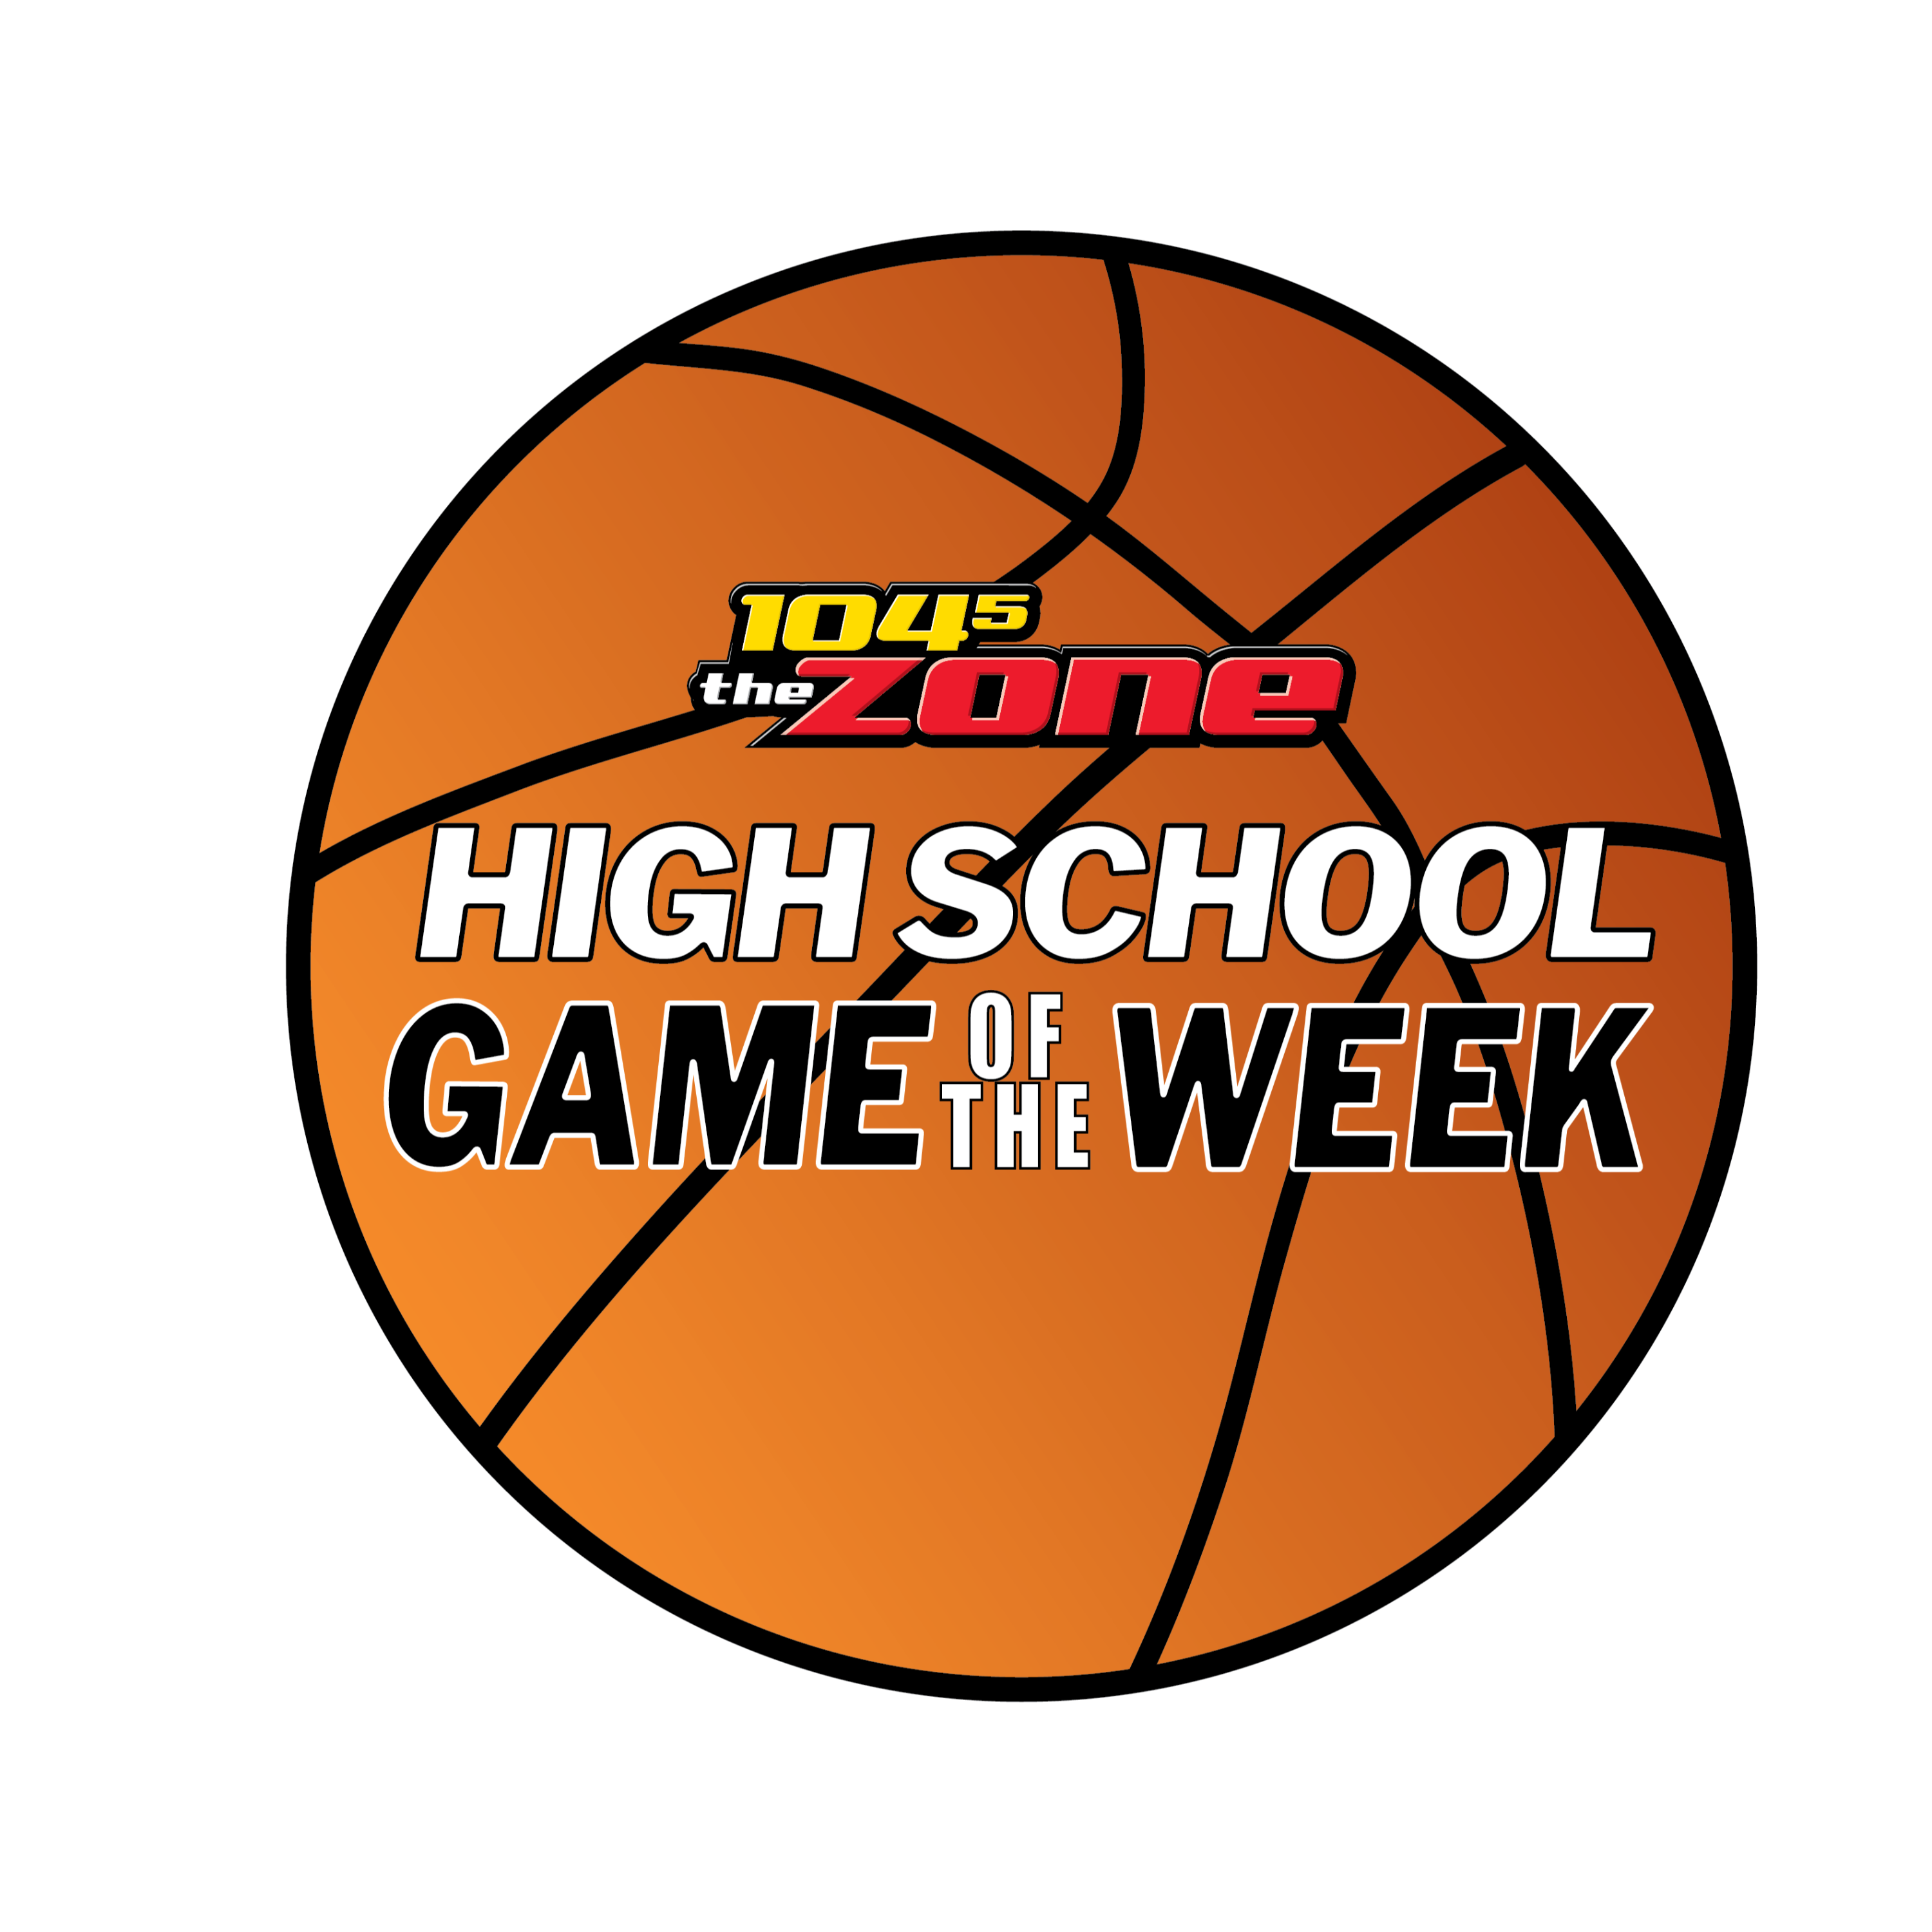 The 104.5 The Zone High School Basketball Game of the Week